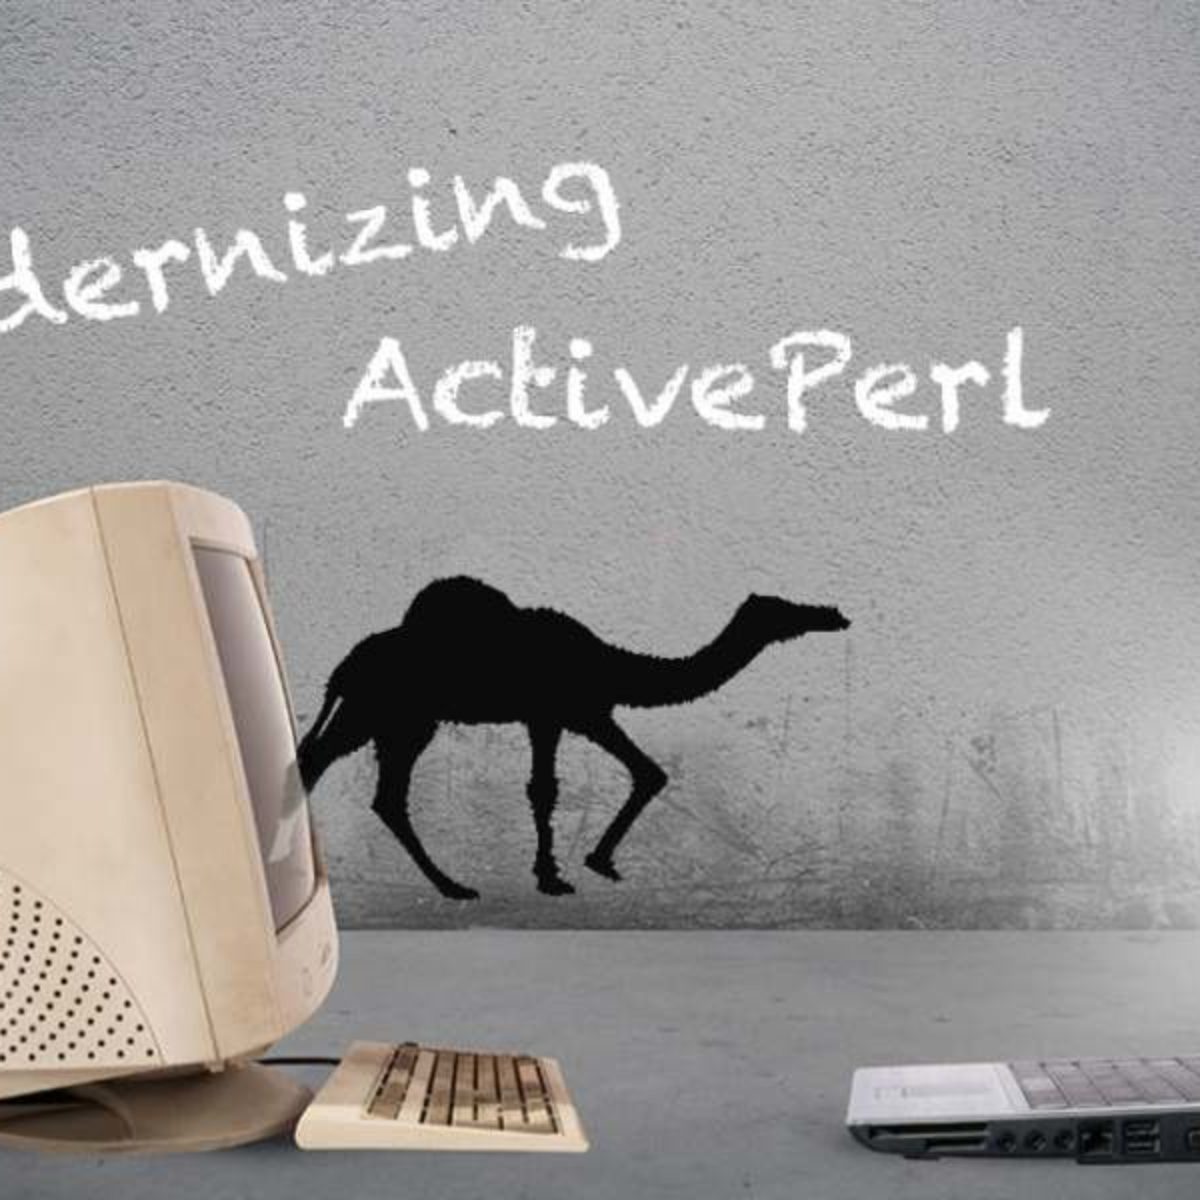 activeperl 5.12 2